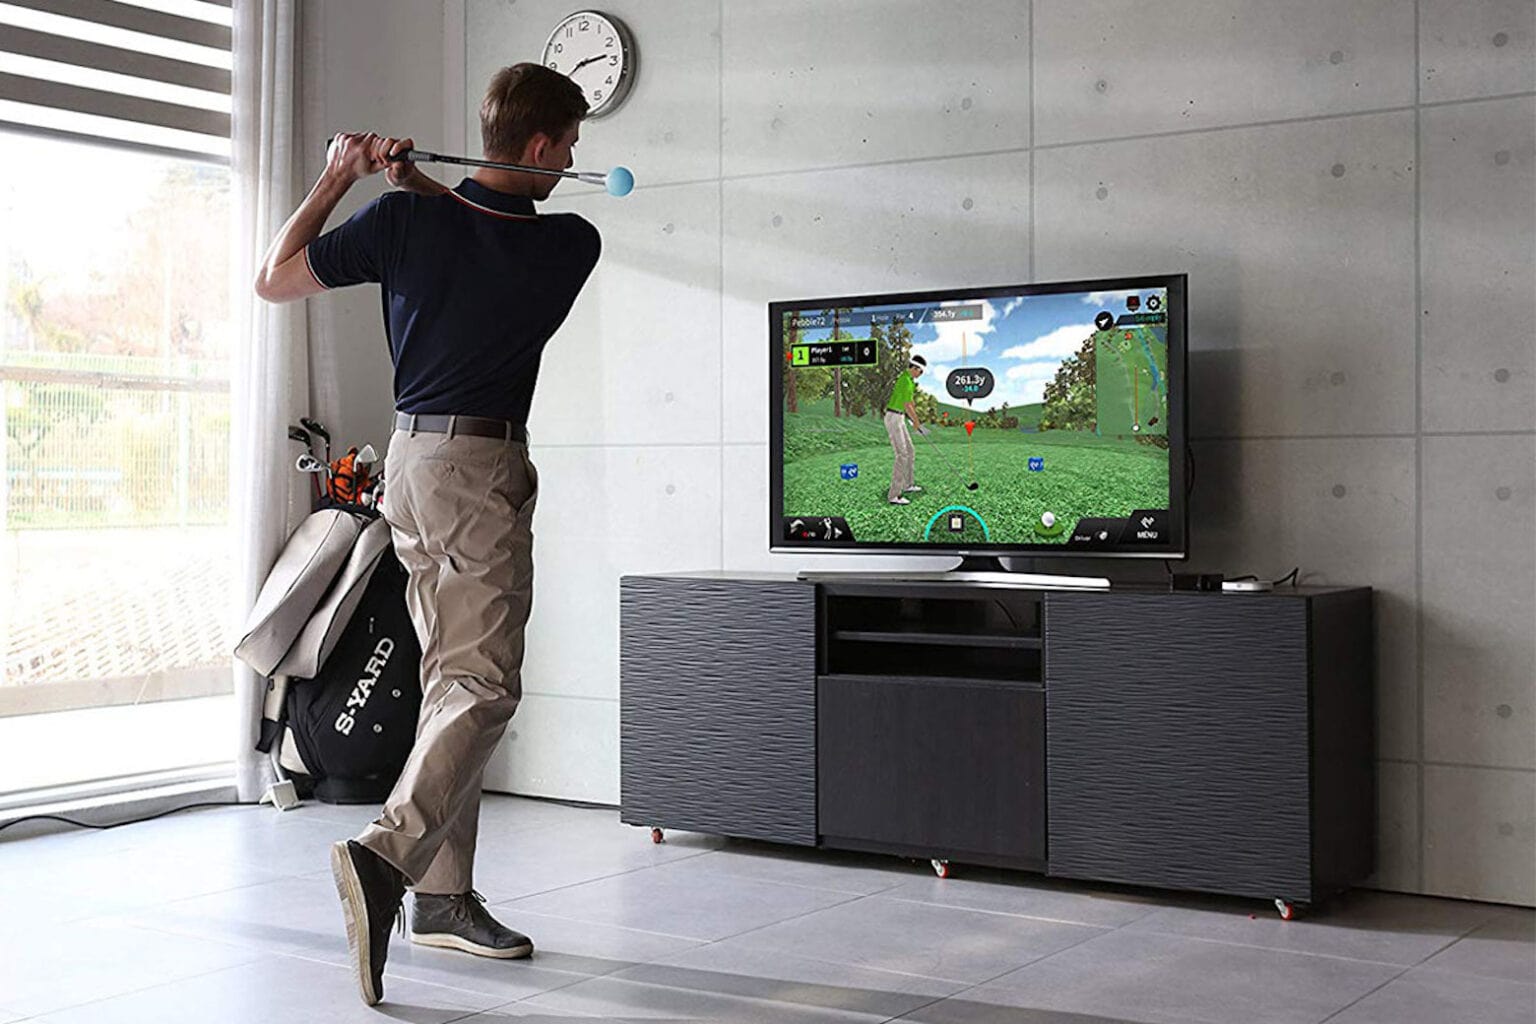 For an extra 15% off you can work on your golf swing indoors with our Pre-Black Friday sale.